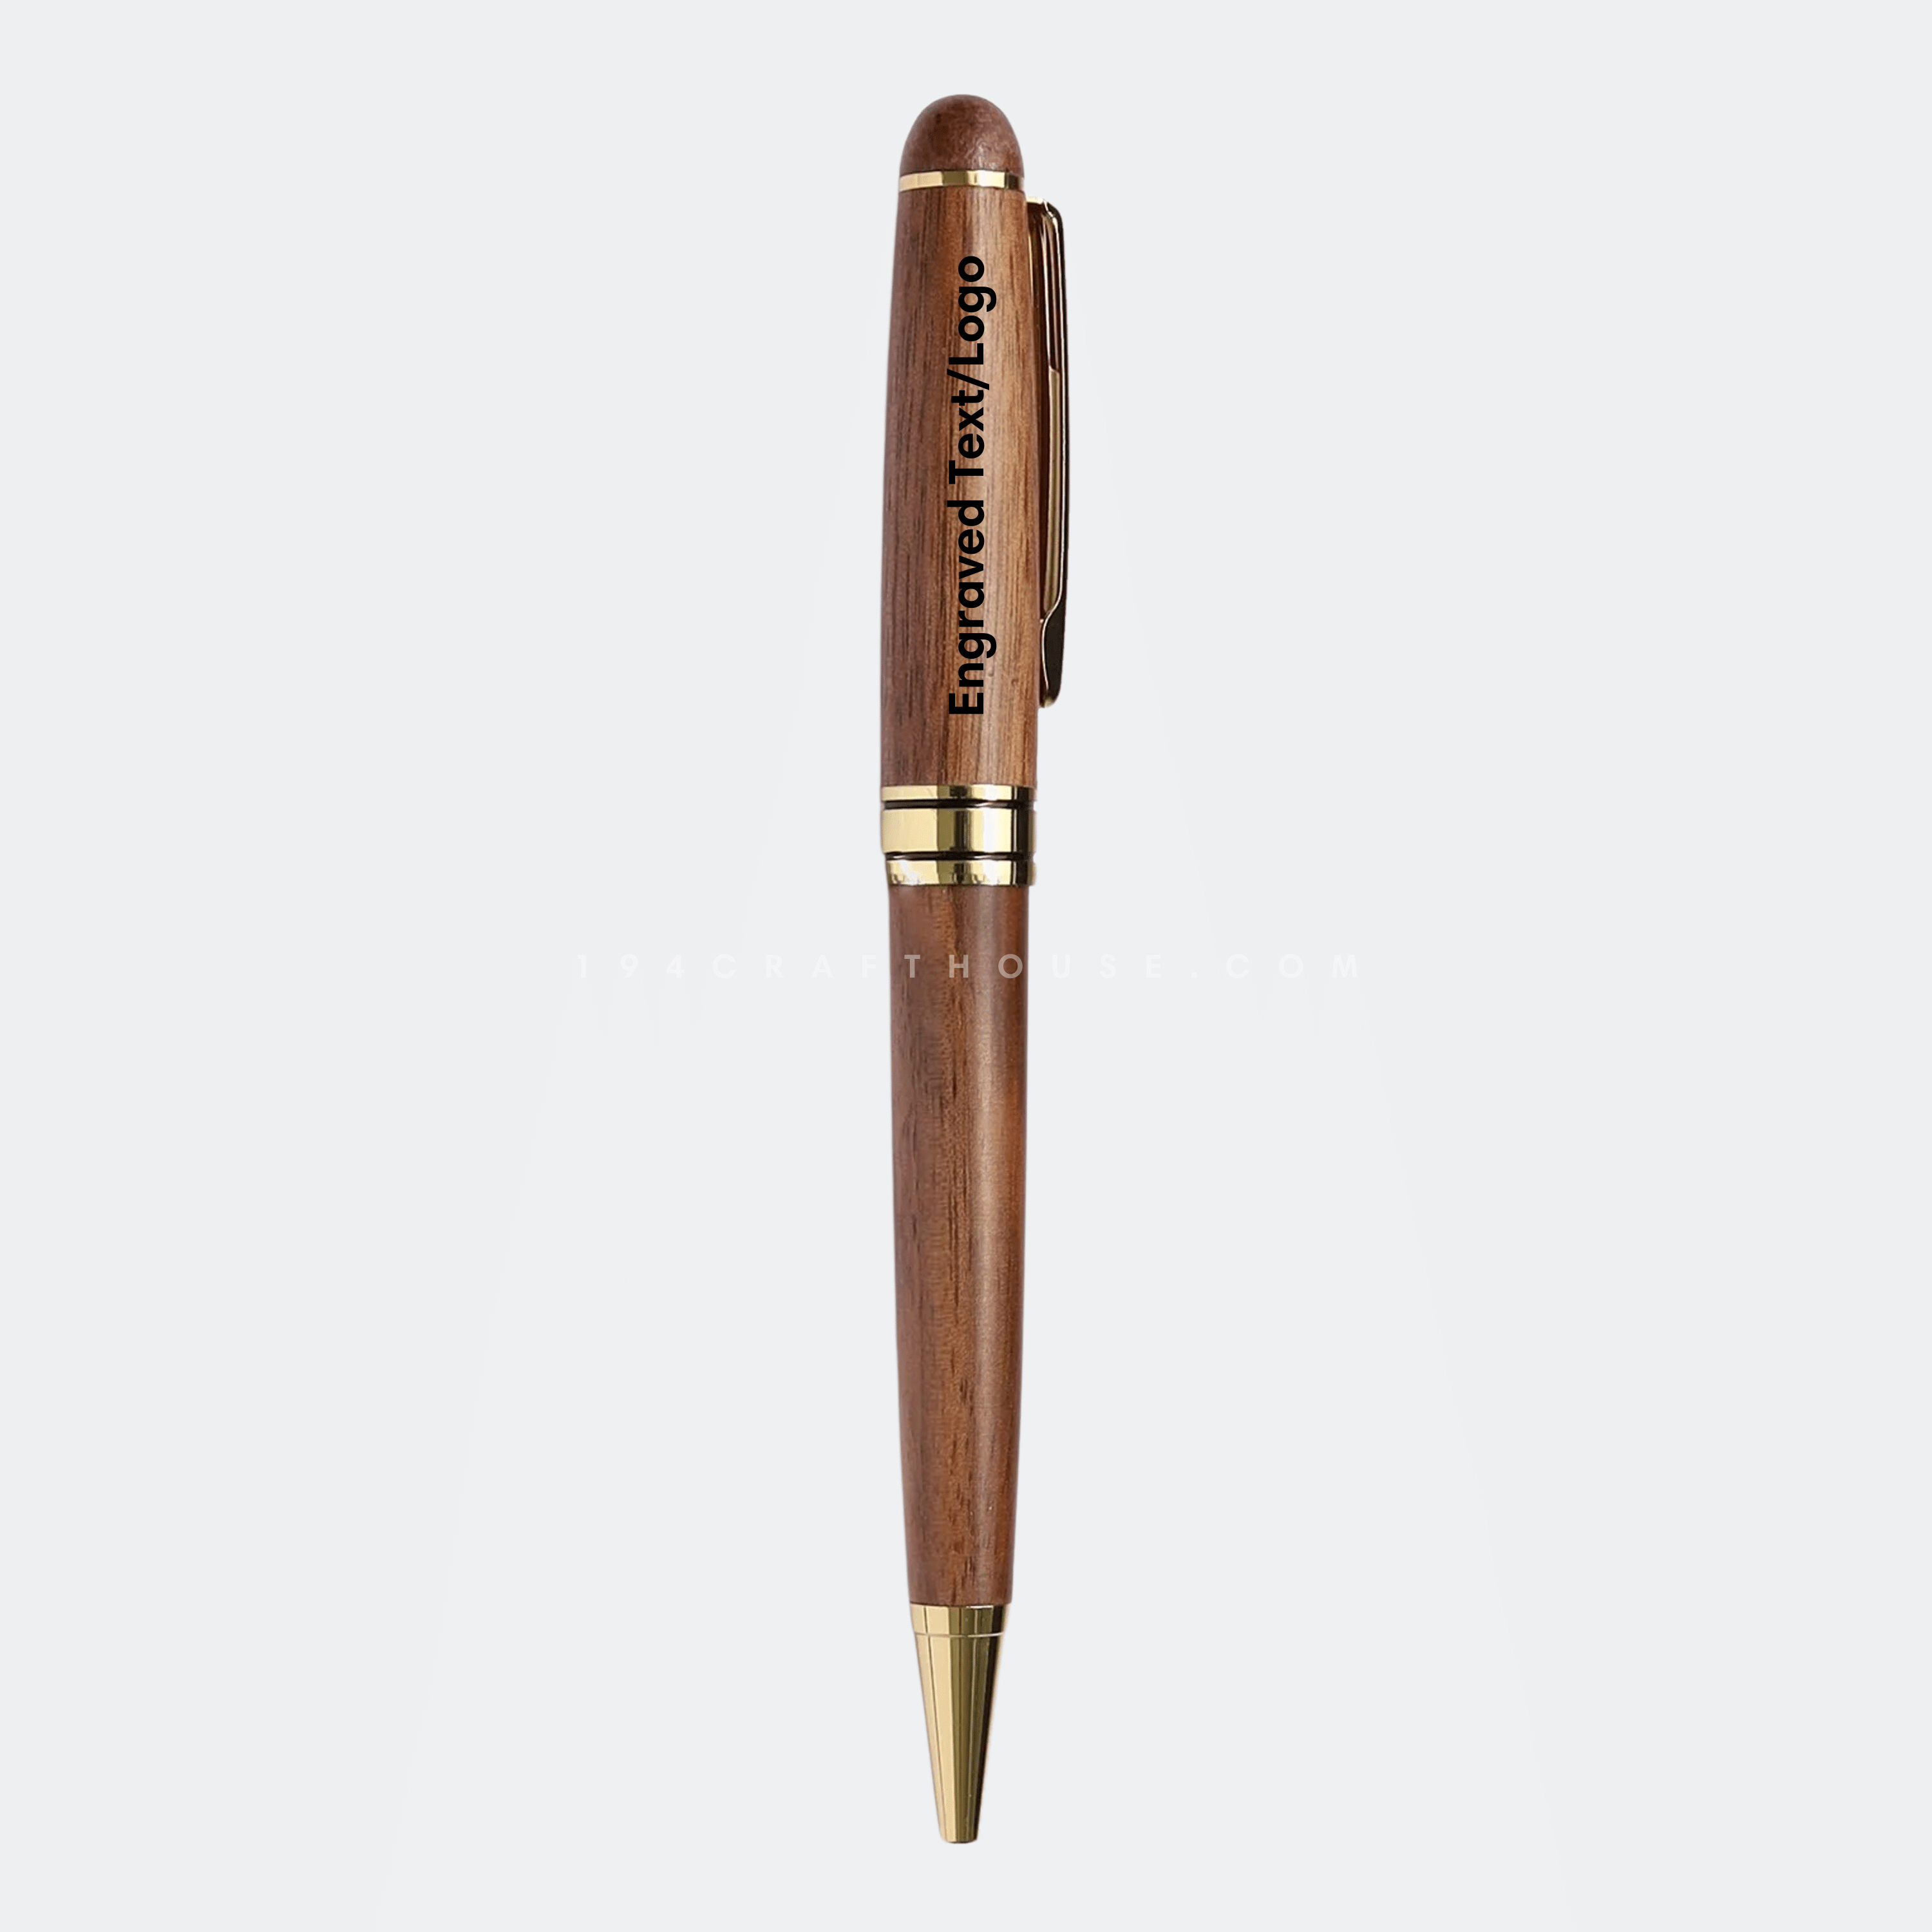 Silver Grey Personalized Ball Pen: Gift/Send Home and Living Gifts Online  M11015280 |IGP.com | Teachers day gifts, Online gifts, Pen price